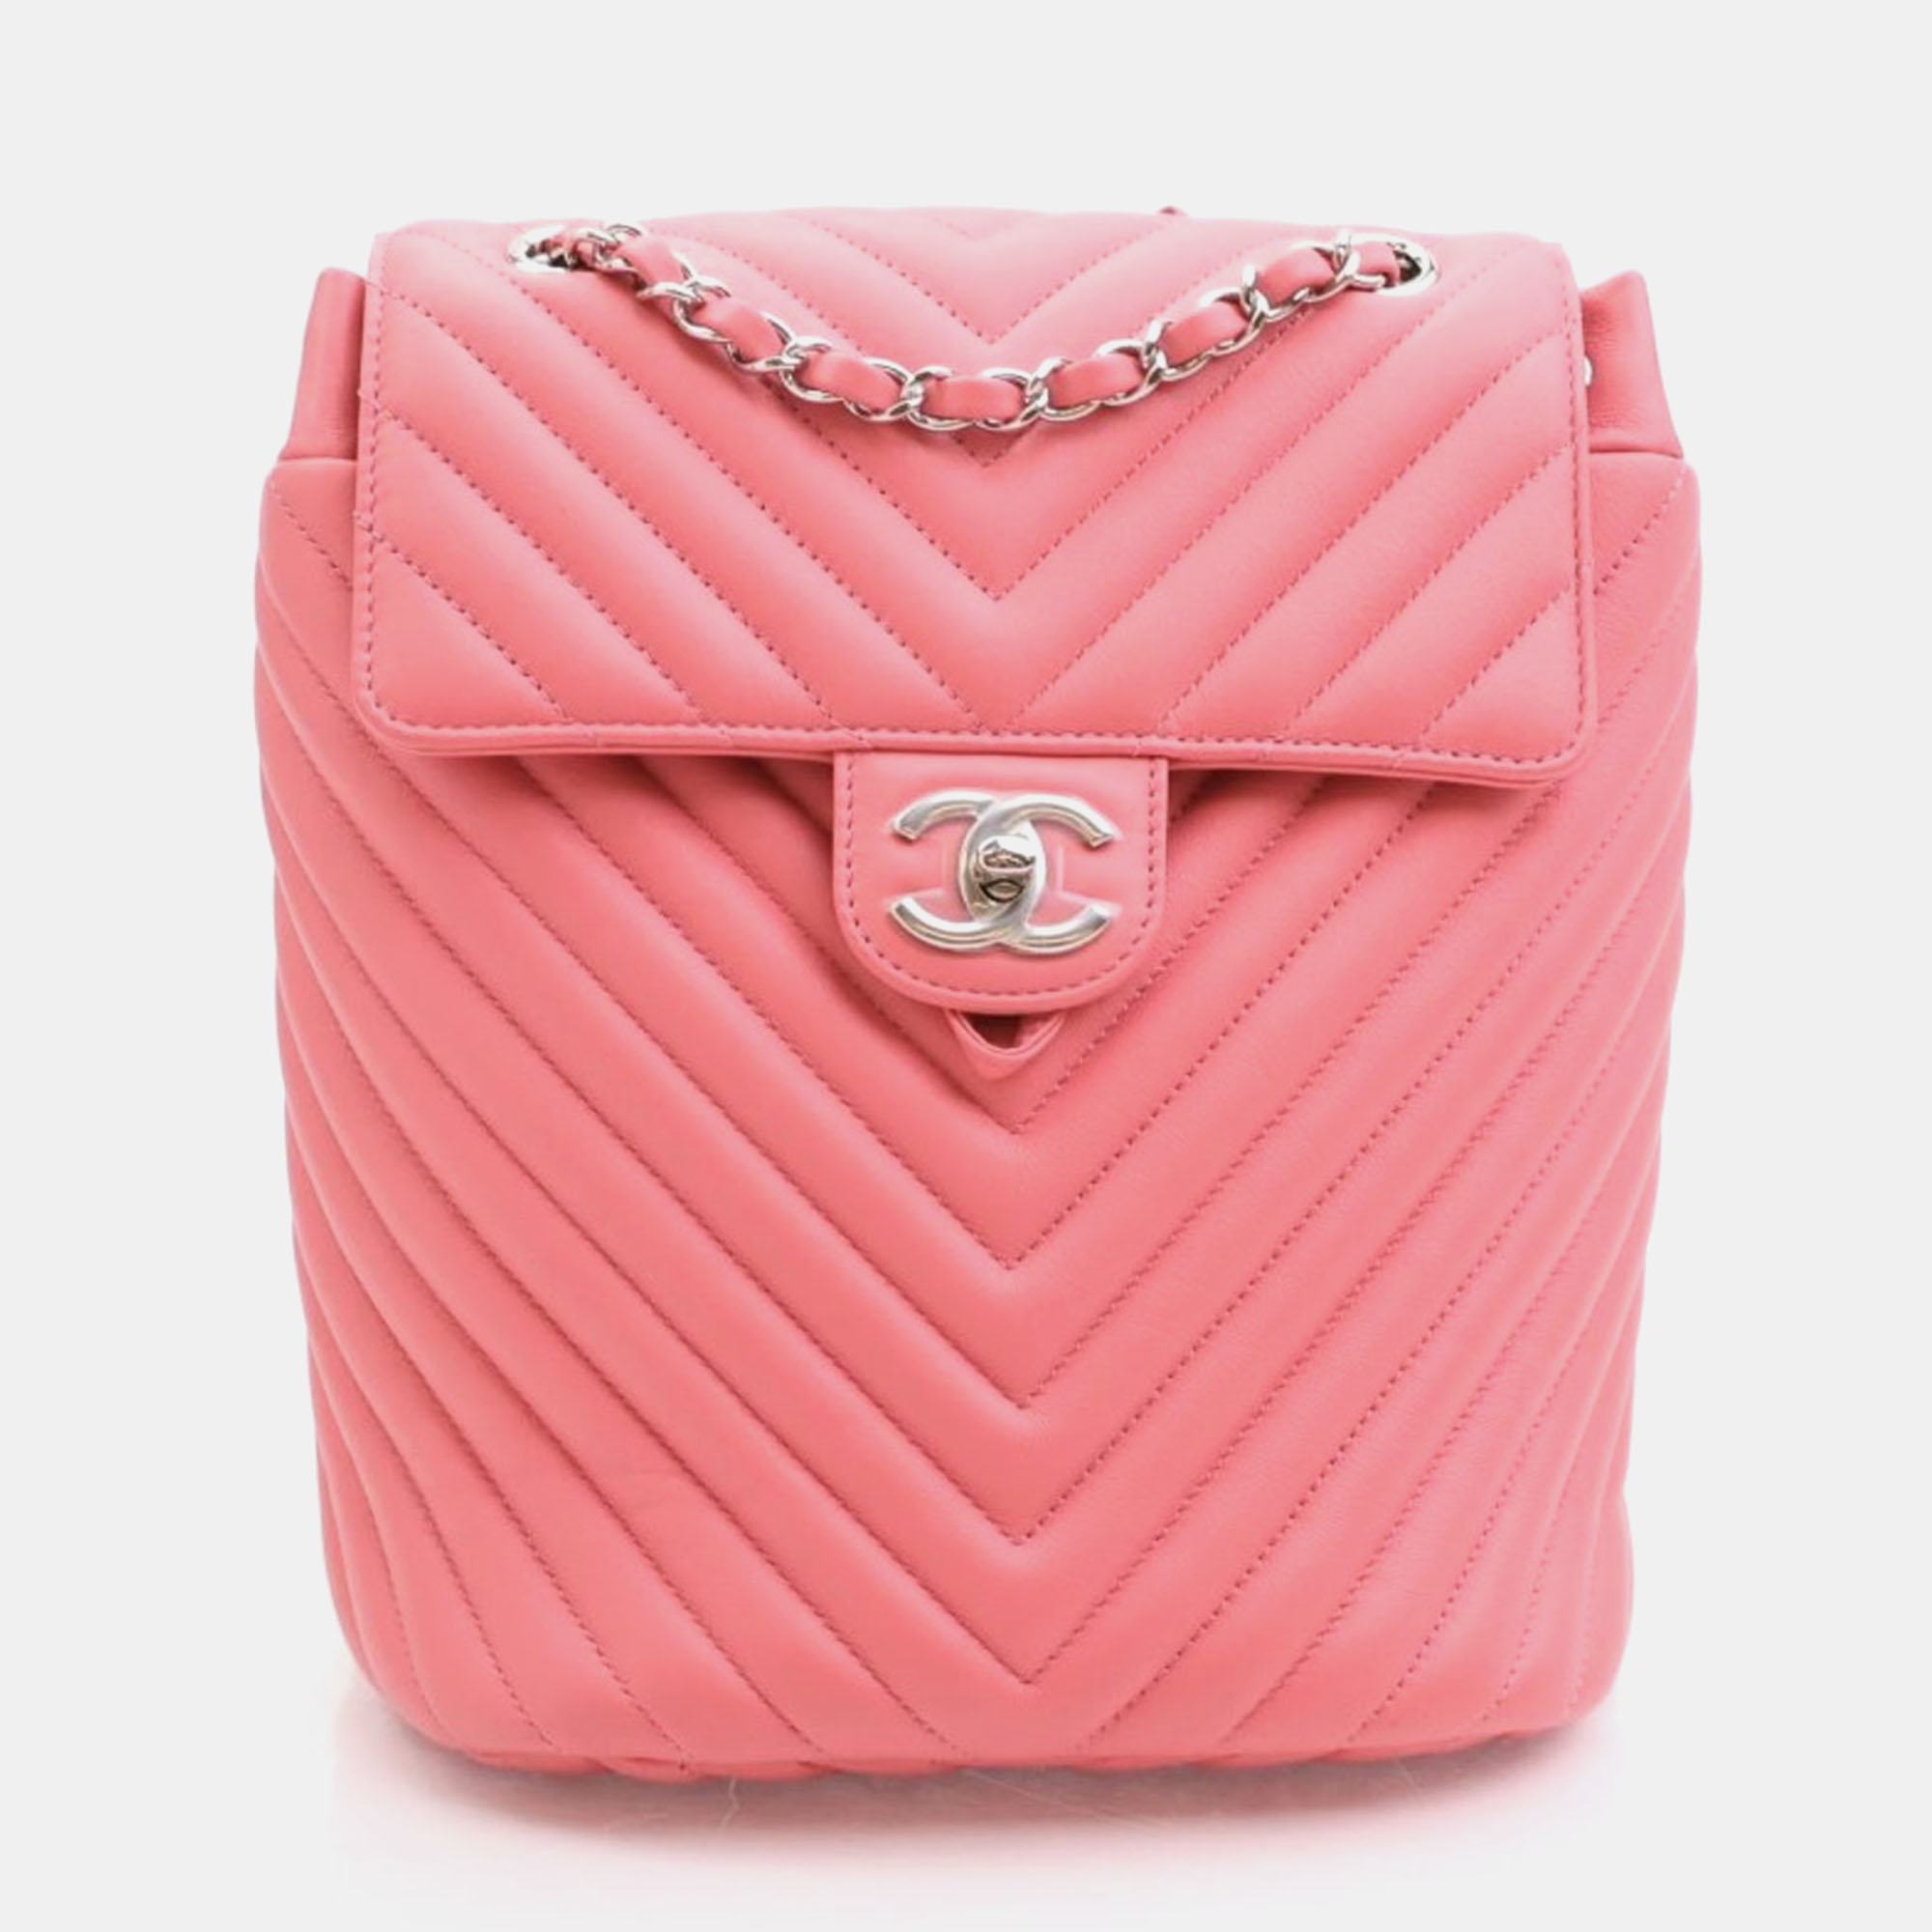 Chanel pink leather small urban spirit backpack